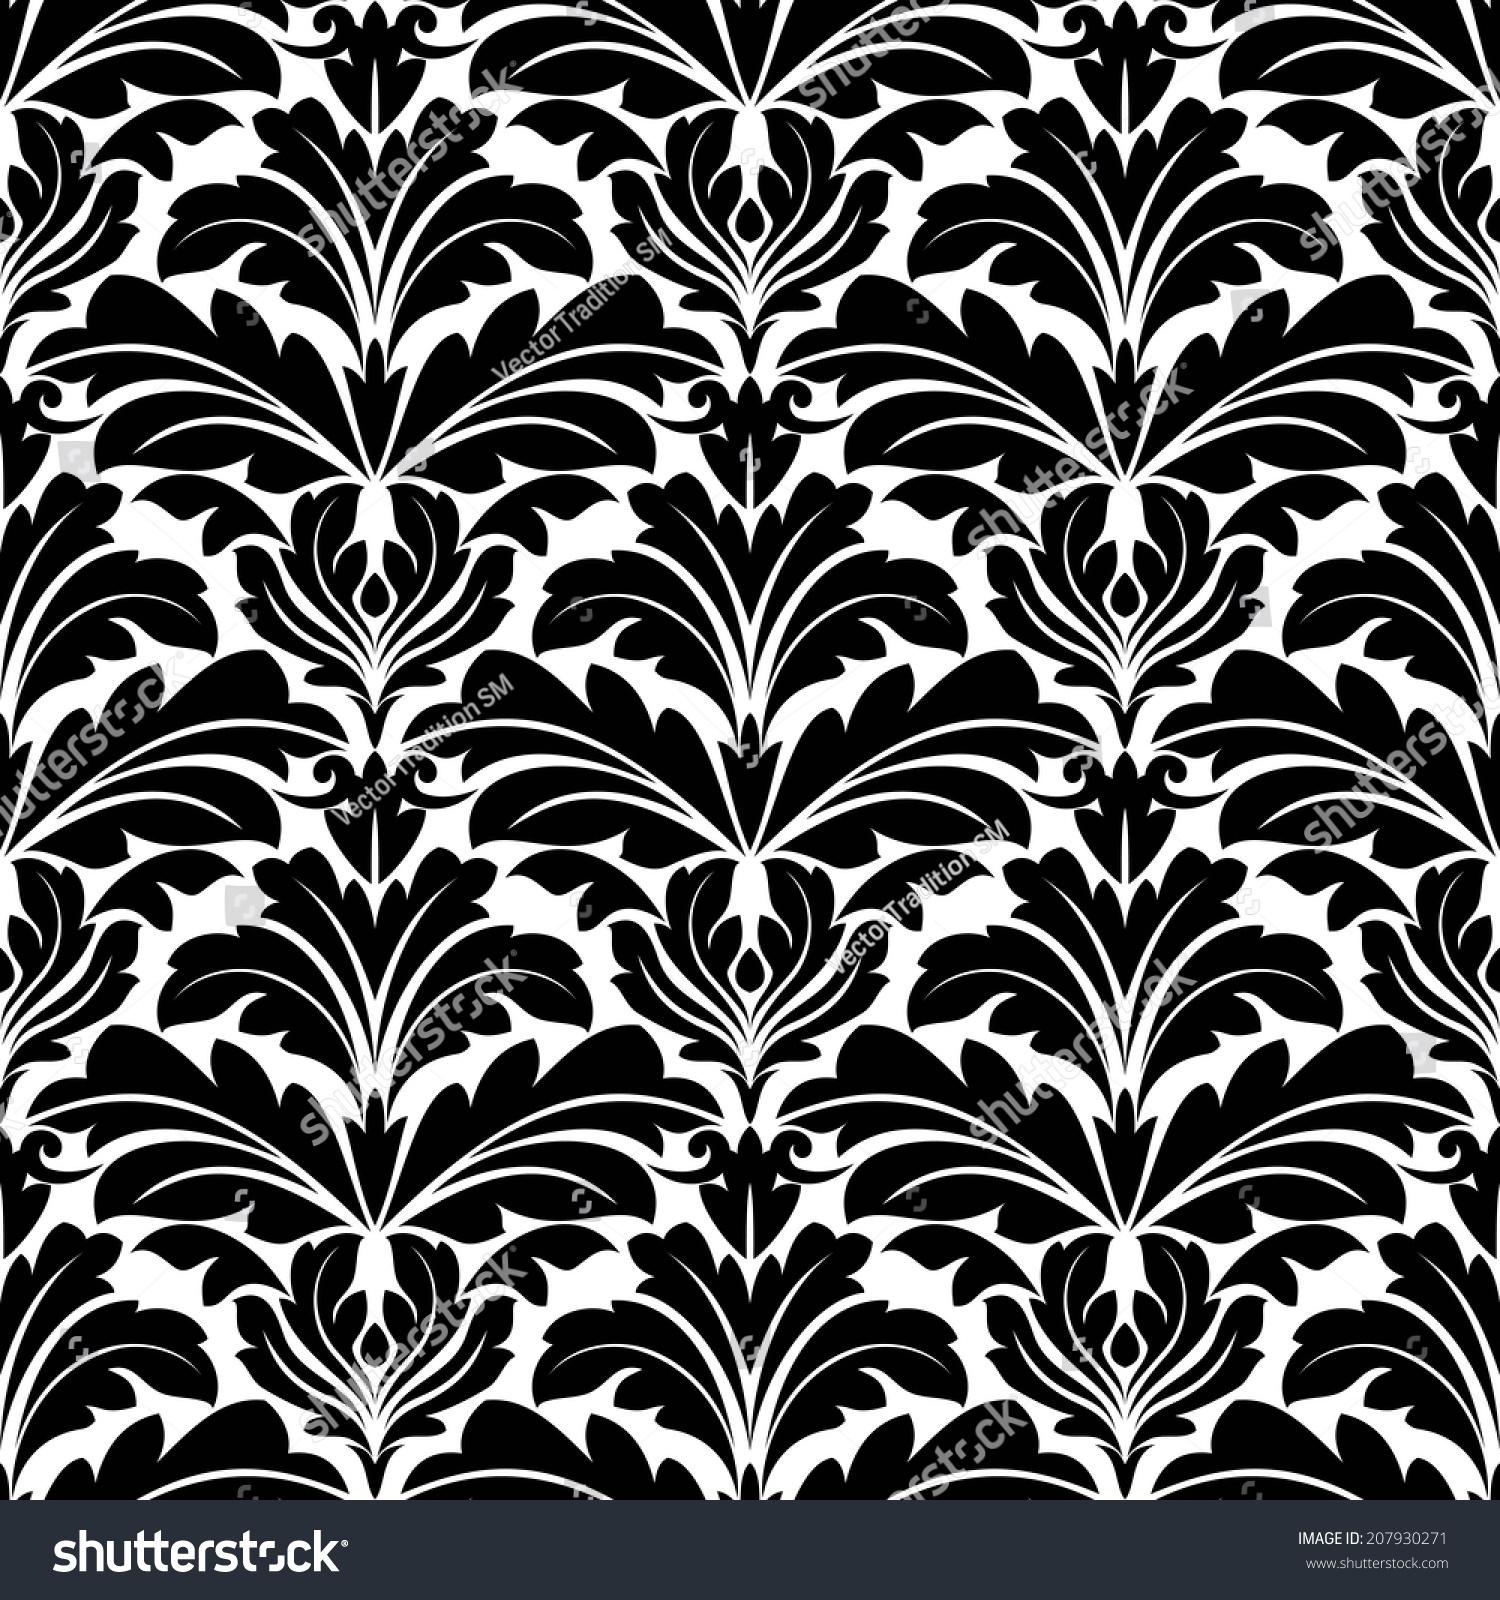 1500 x 1600 · jpeg - Bold Black And White Damask Floral Seamless Pattern With A Repeat Motif ...